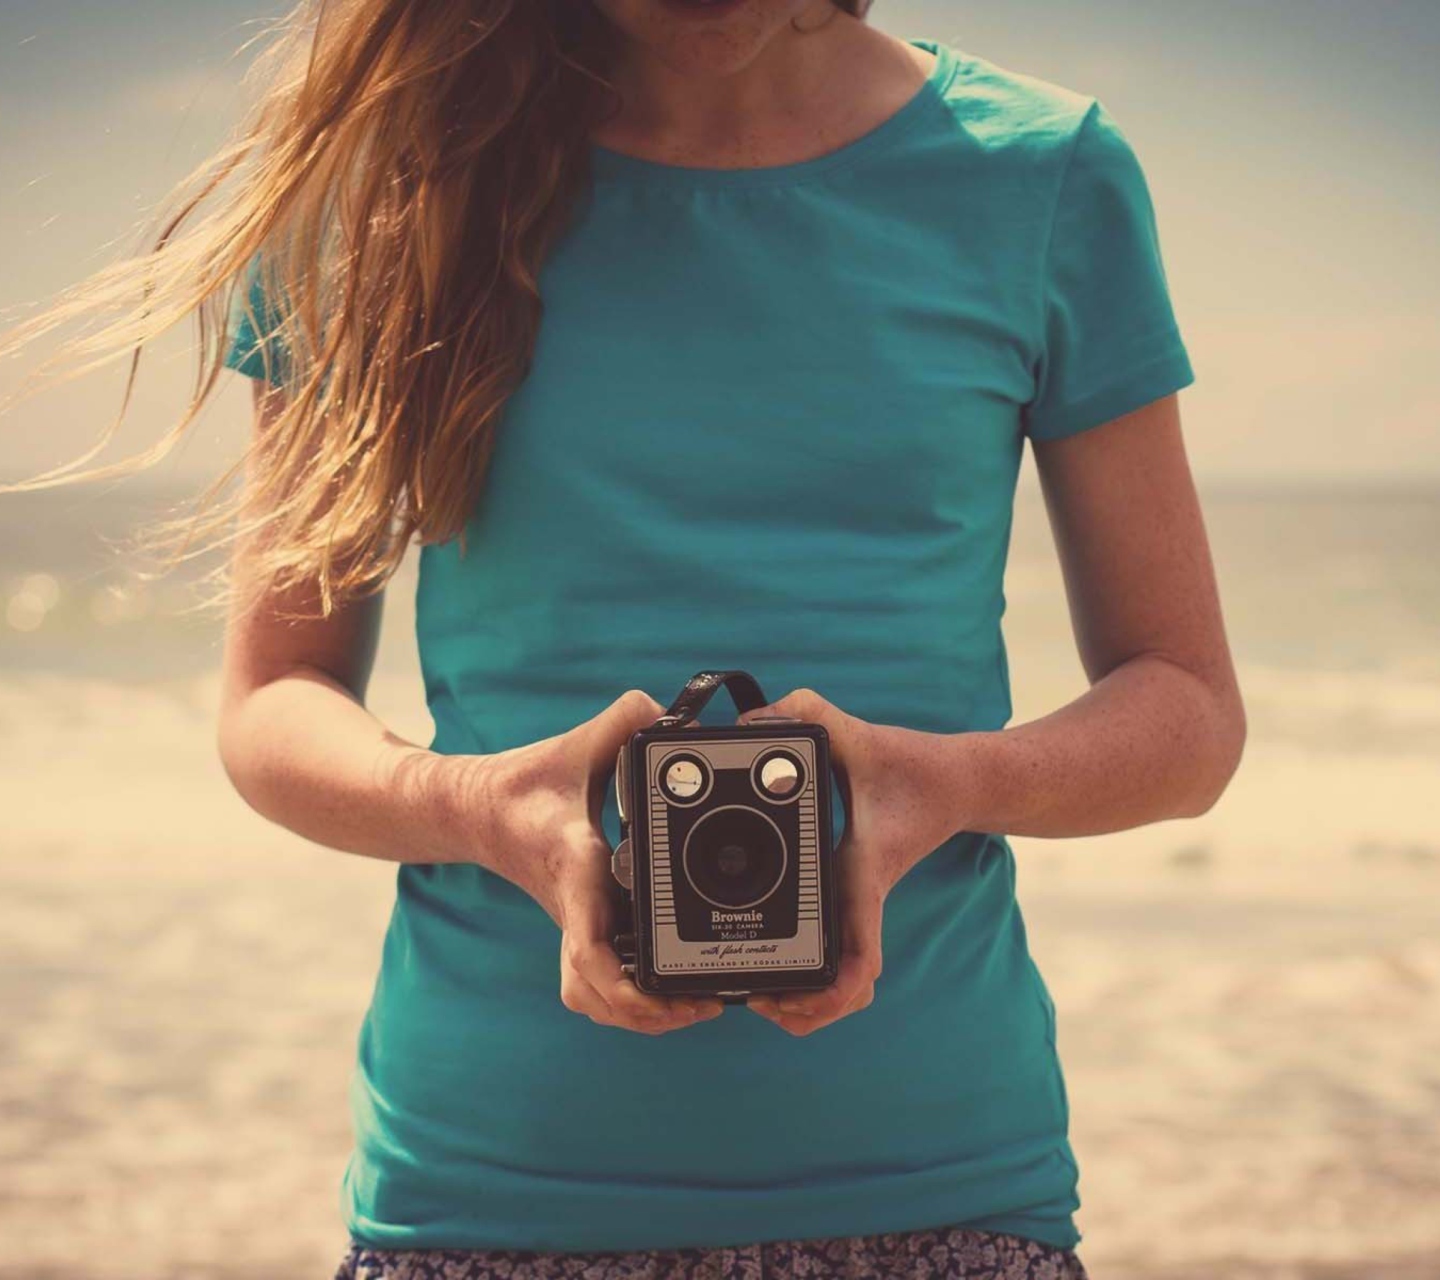 Girl On Beach With Retro Camera In Hands wallpaper 1440x1280